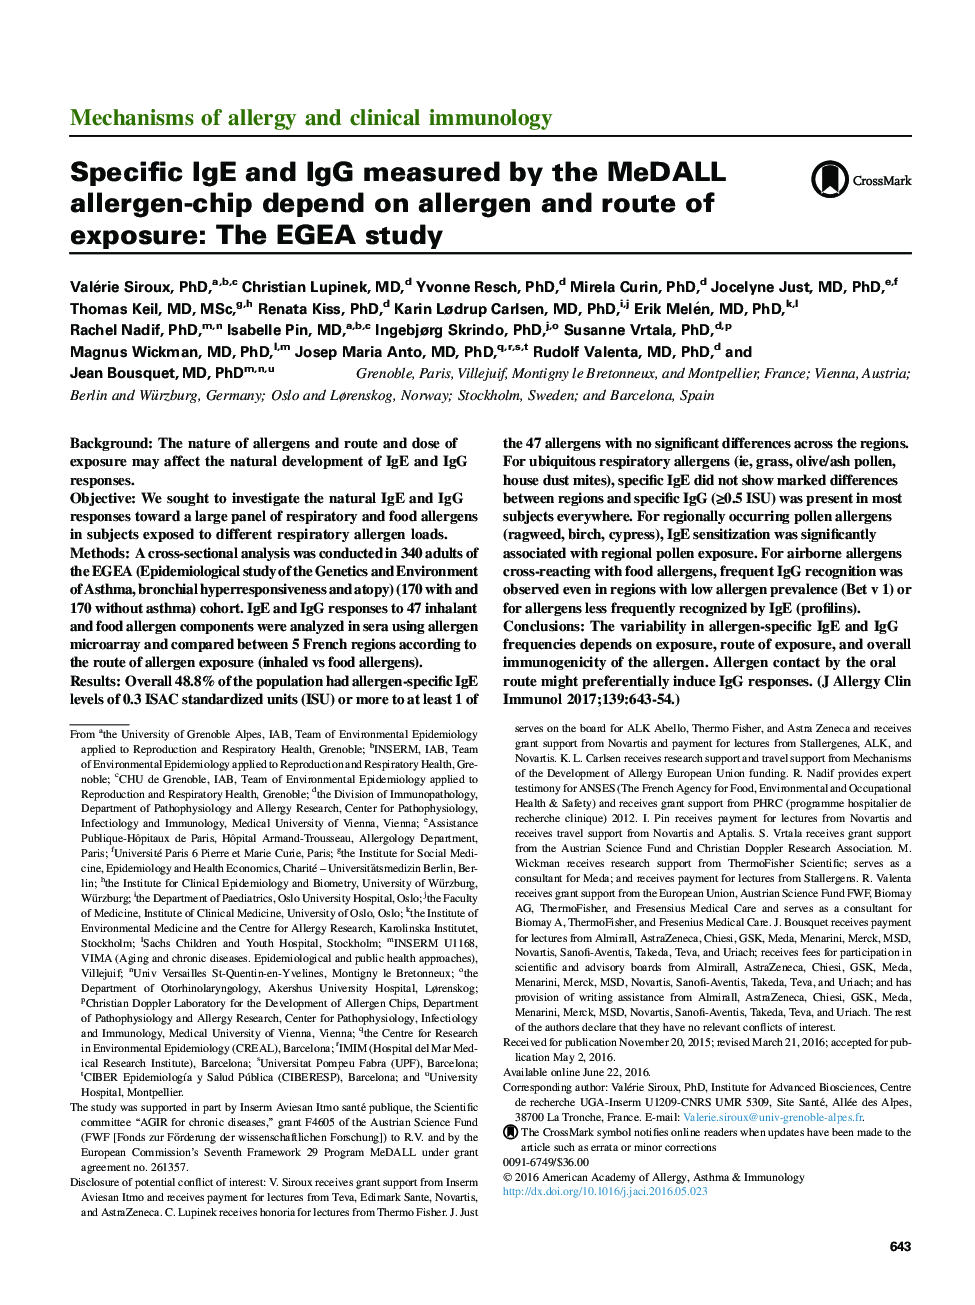 Specific IgE and IgG measured by the MeDALL allergen-chip depend on allergen and route of exposure: The EGEA study